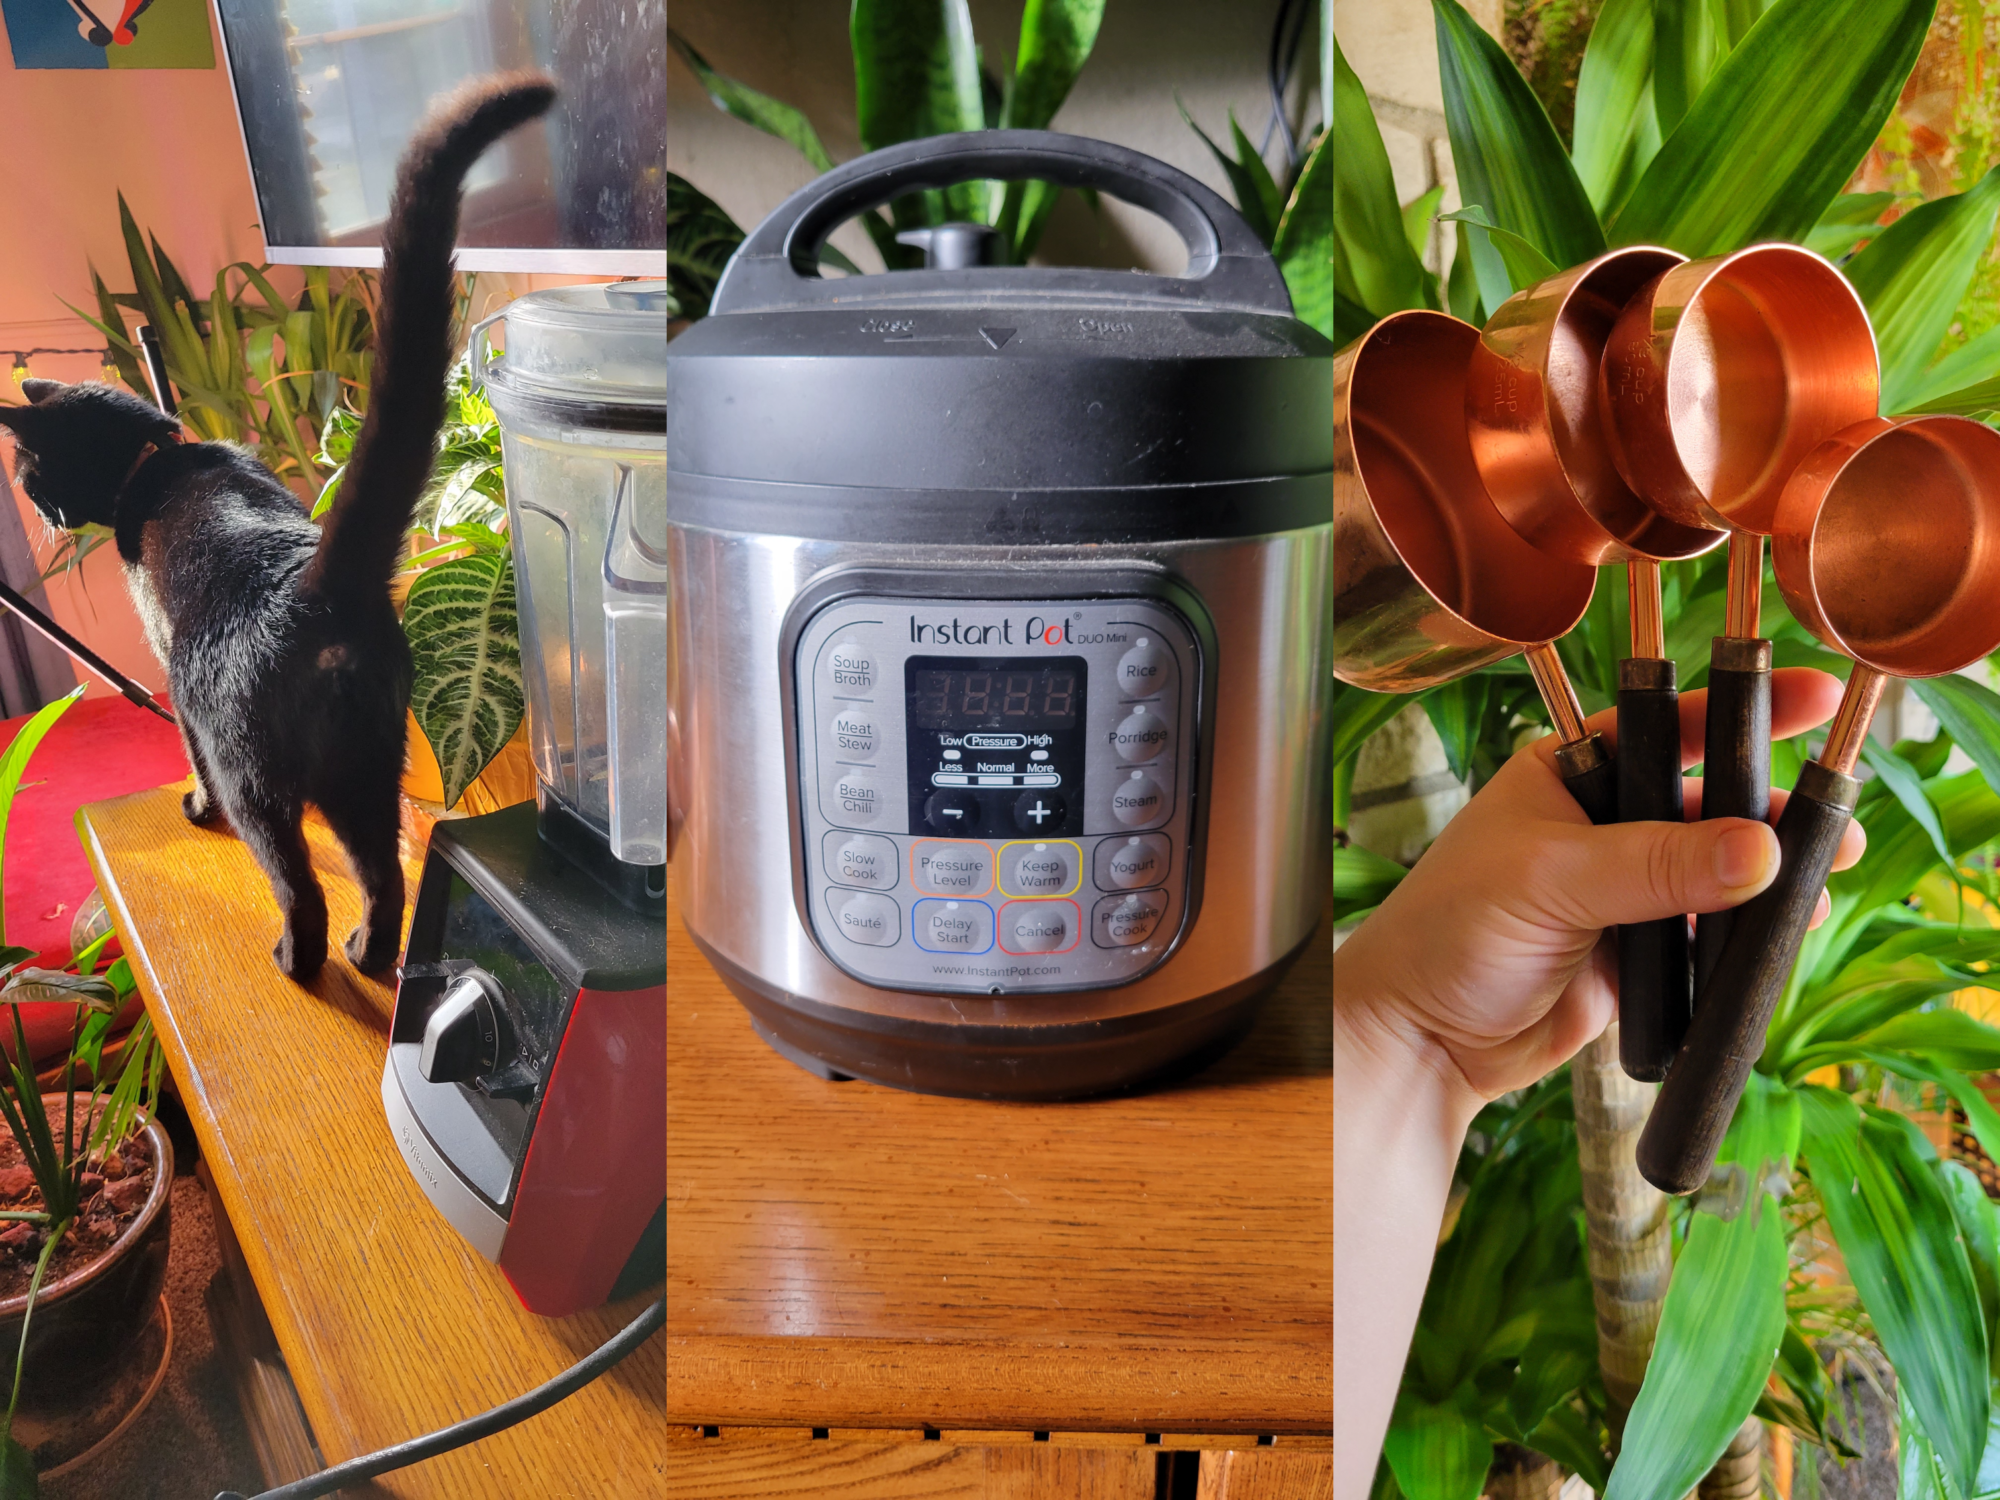 Top 5 Overrated Kitchen Gadgets NOT Worth Buying - Catfish Out of